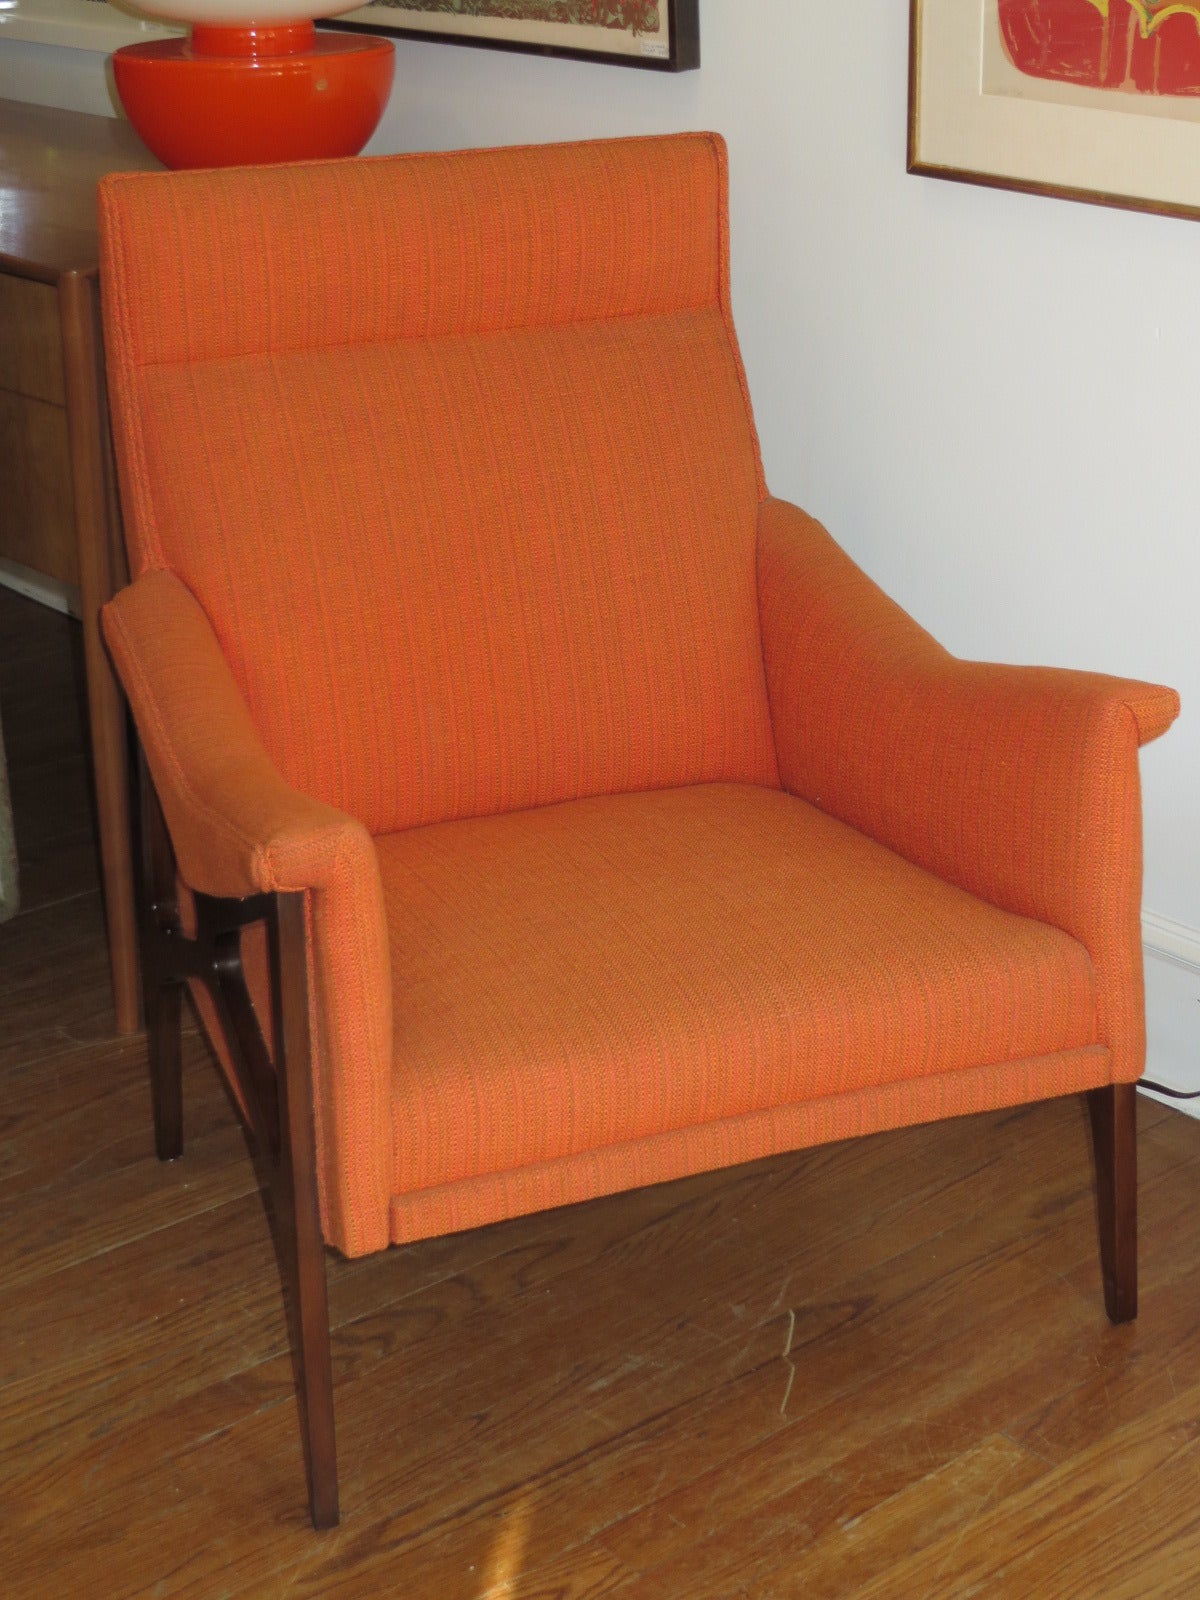 1960s armchair in the style of Paul McCobb. The  chair's design is sculptural and appealing from every angle. Chair is very solid yet appears to float, characteristic of Mid-Century design.